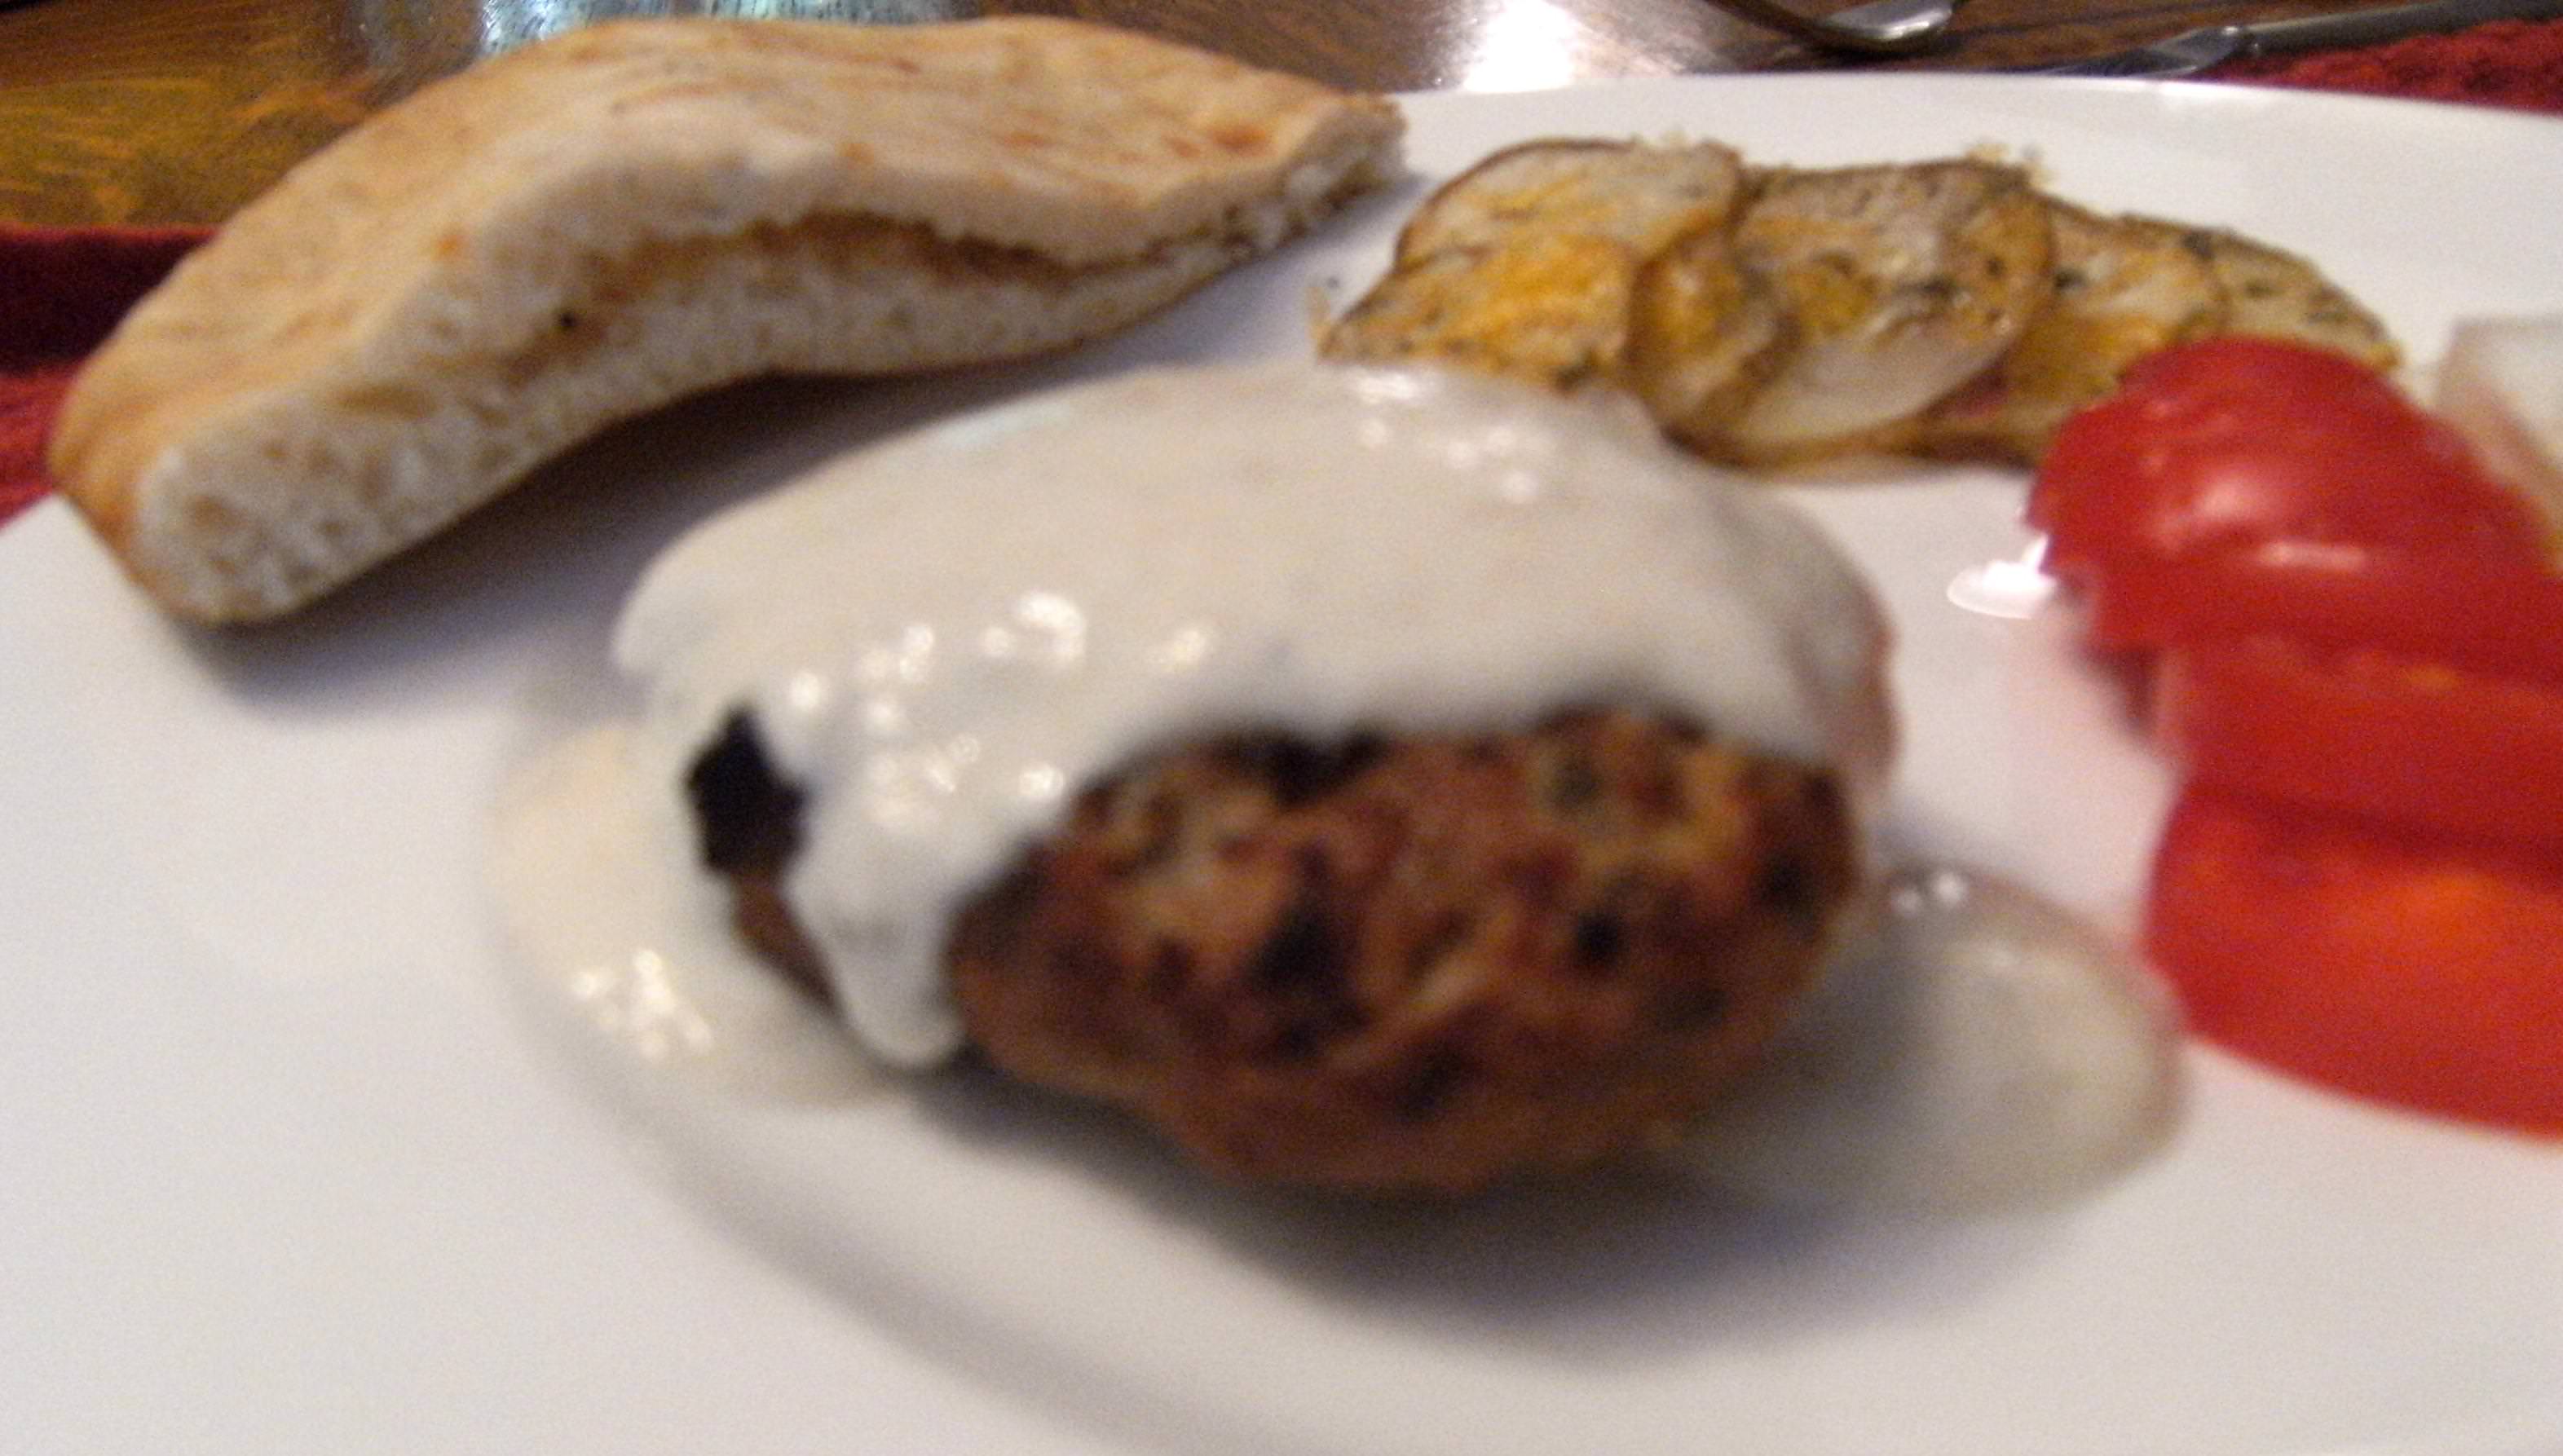 Kafta (also spelled Kofta or Kufta) is an ethnic dish made from any of a variety of ground meats. Primarily, lamb, pork or beef are used. Get the recipe to make Kafta with Tahini Yogurt Sauce on ComfortablyDomestic.com